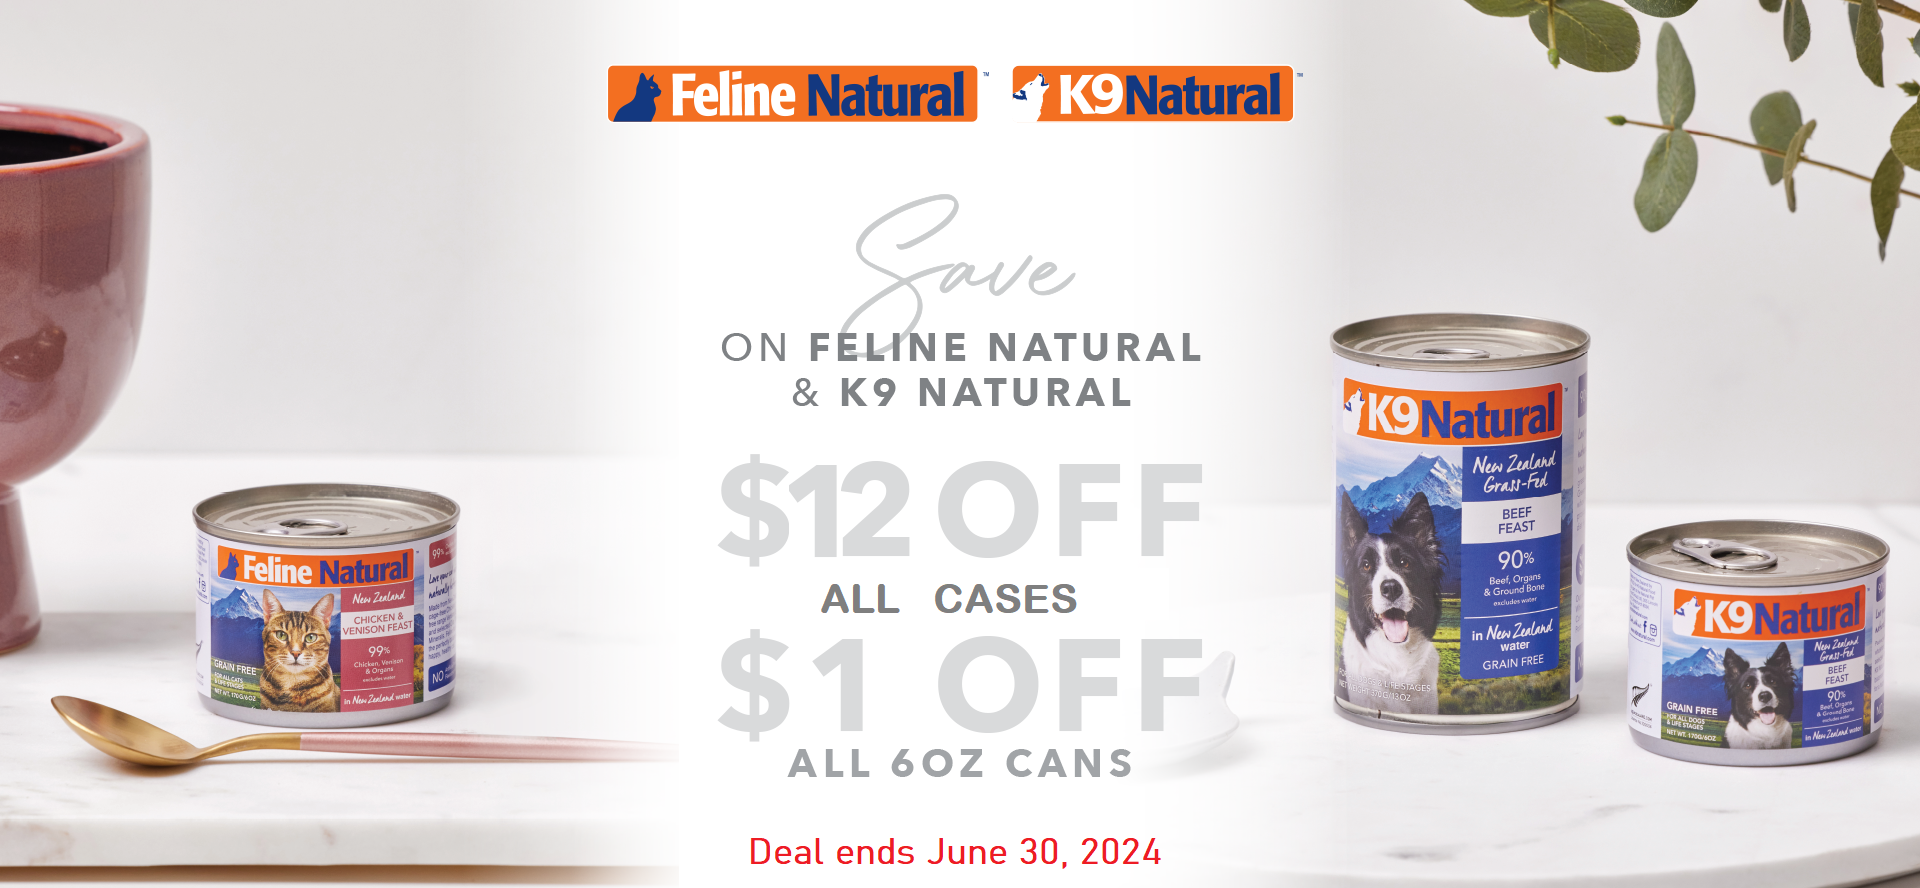 Get a $1 each 6 Oz K9 Natural and Feline Natural Cans